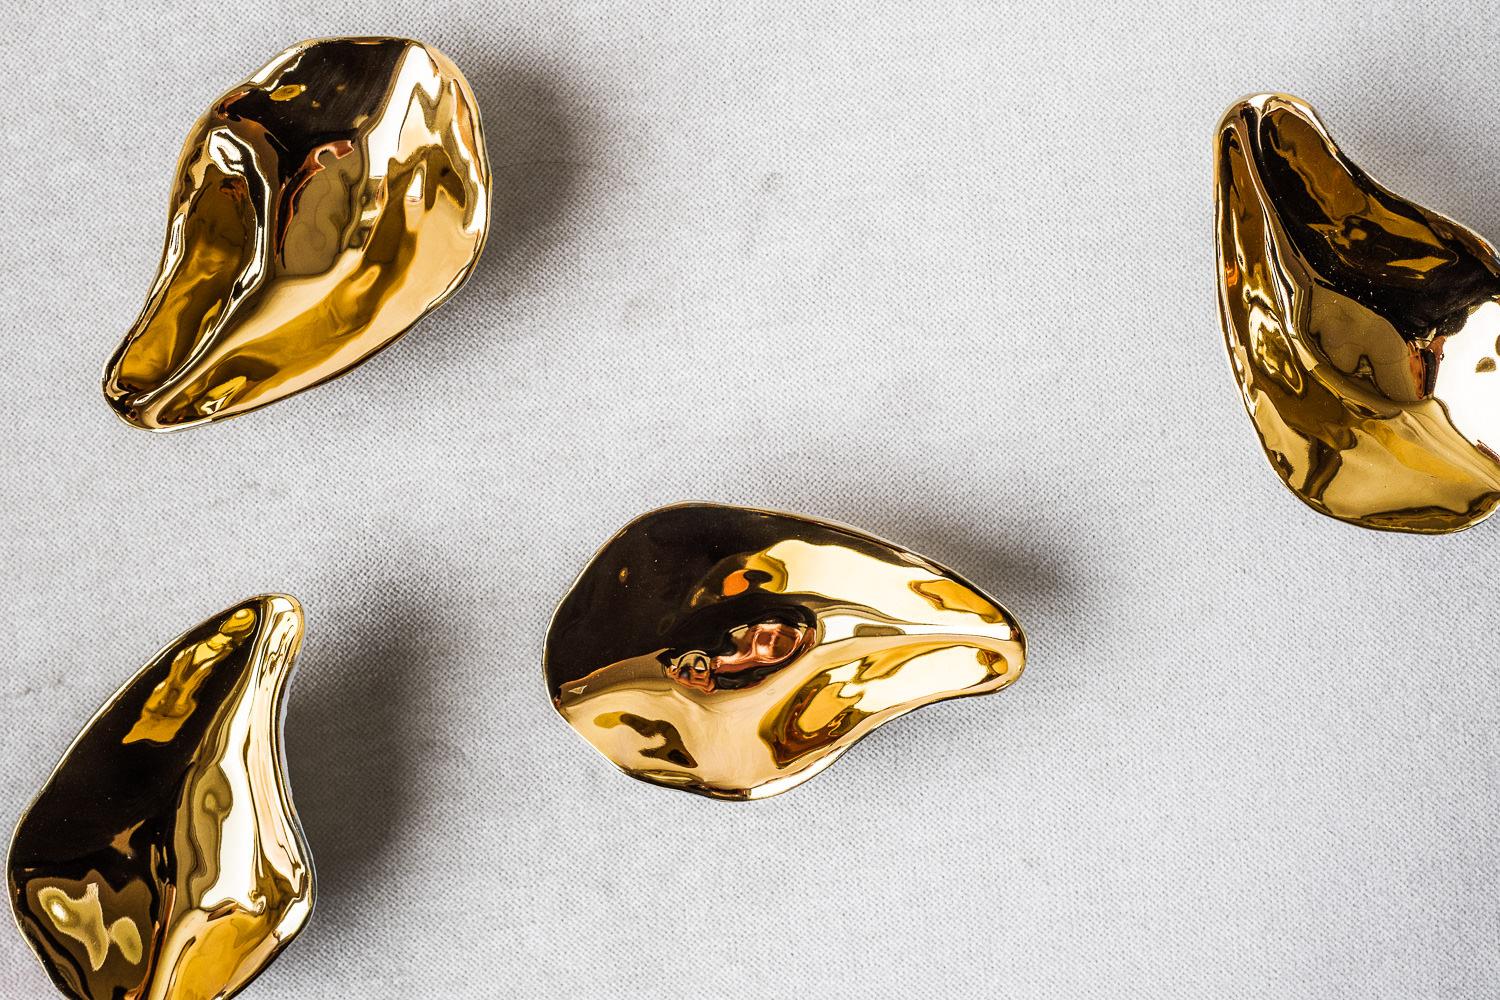 • Set of 4 porcelain spoons 
• 9,5cm x 6cm x 3cm each
• small starter spoon
• or a piece of jewellery for your home
• the ultimate precious and sensual amuse-bouche presentation
• very luxurious hand painted 24k gold finish
• designed in